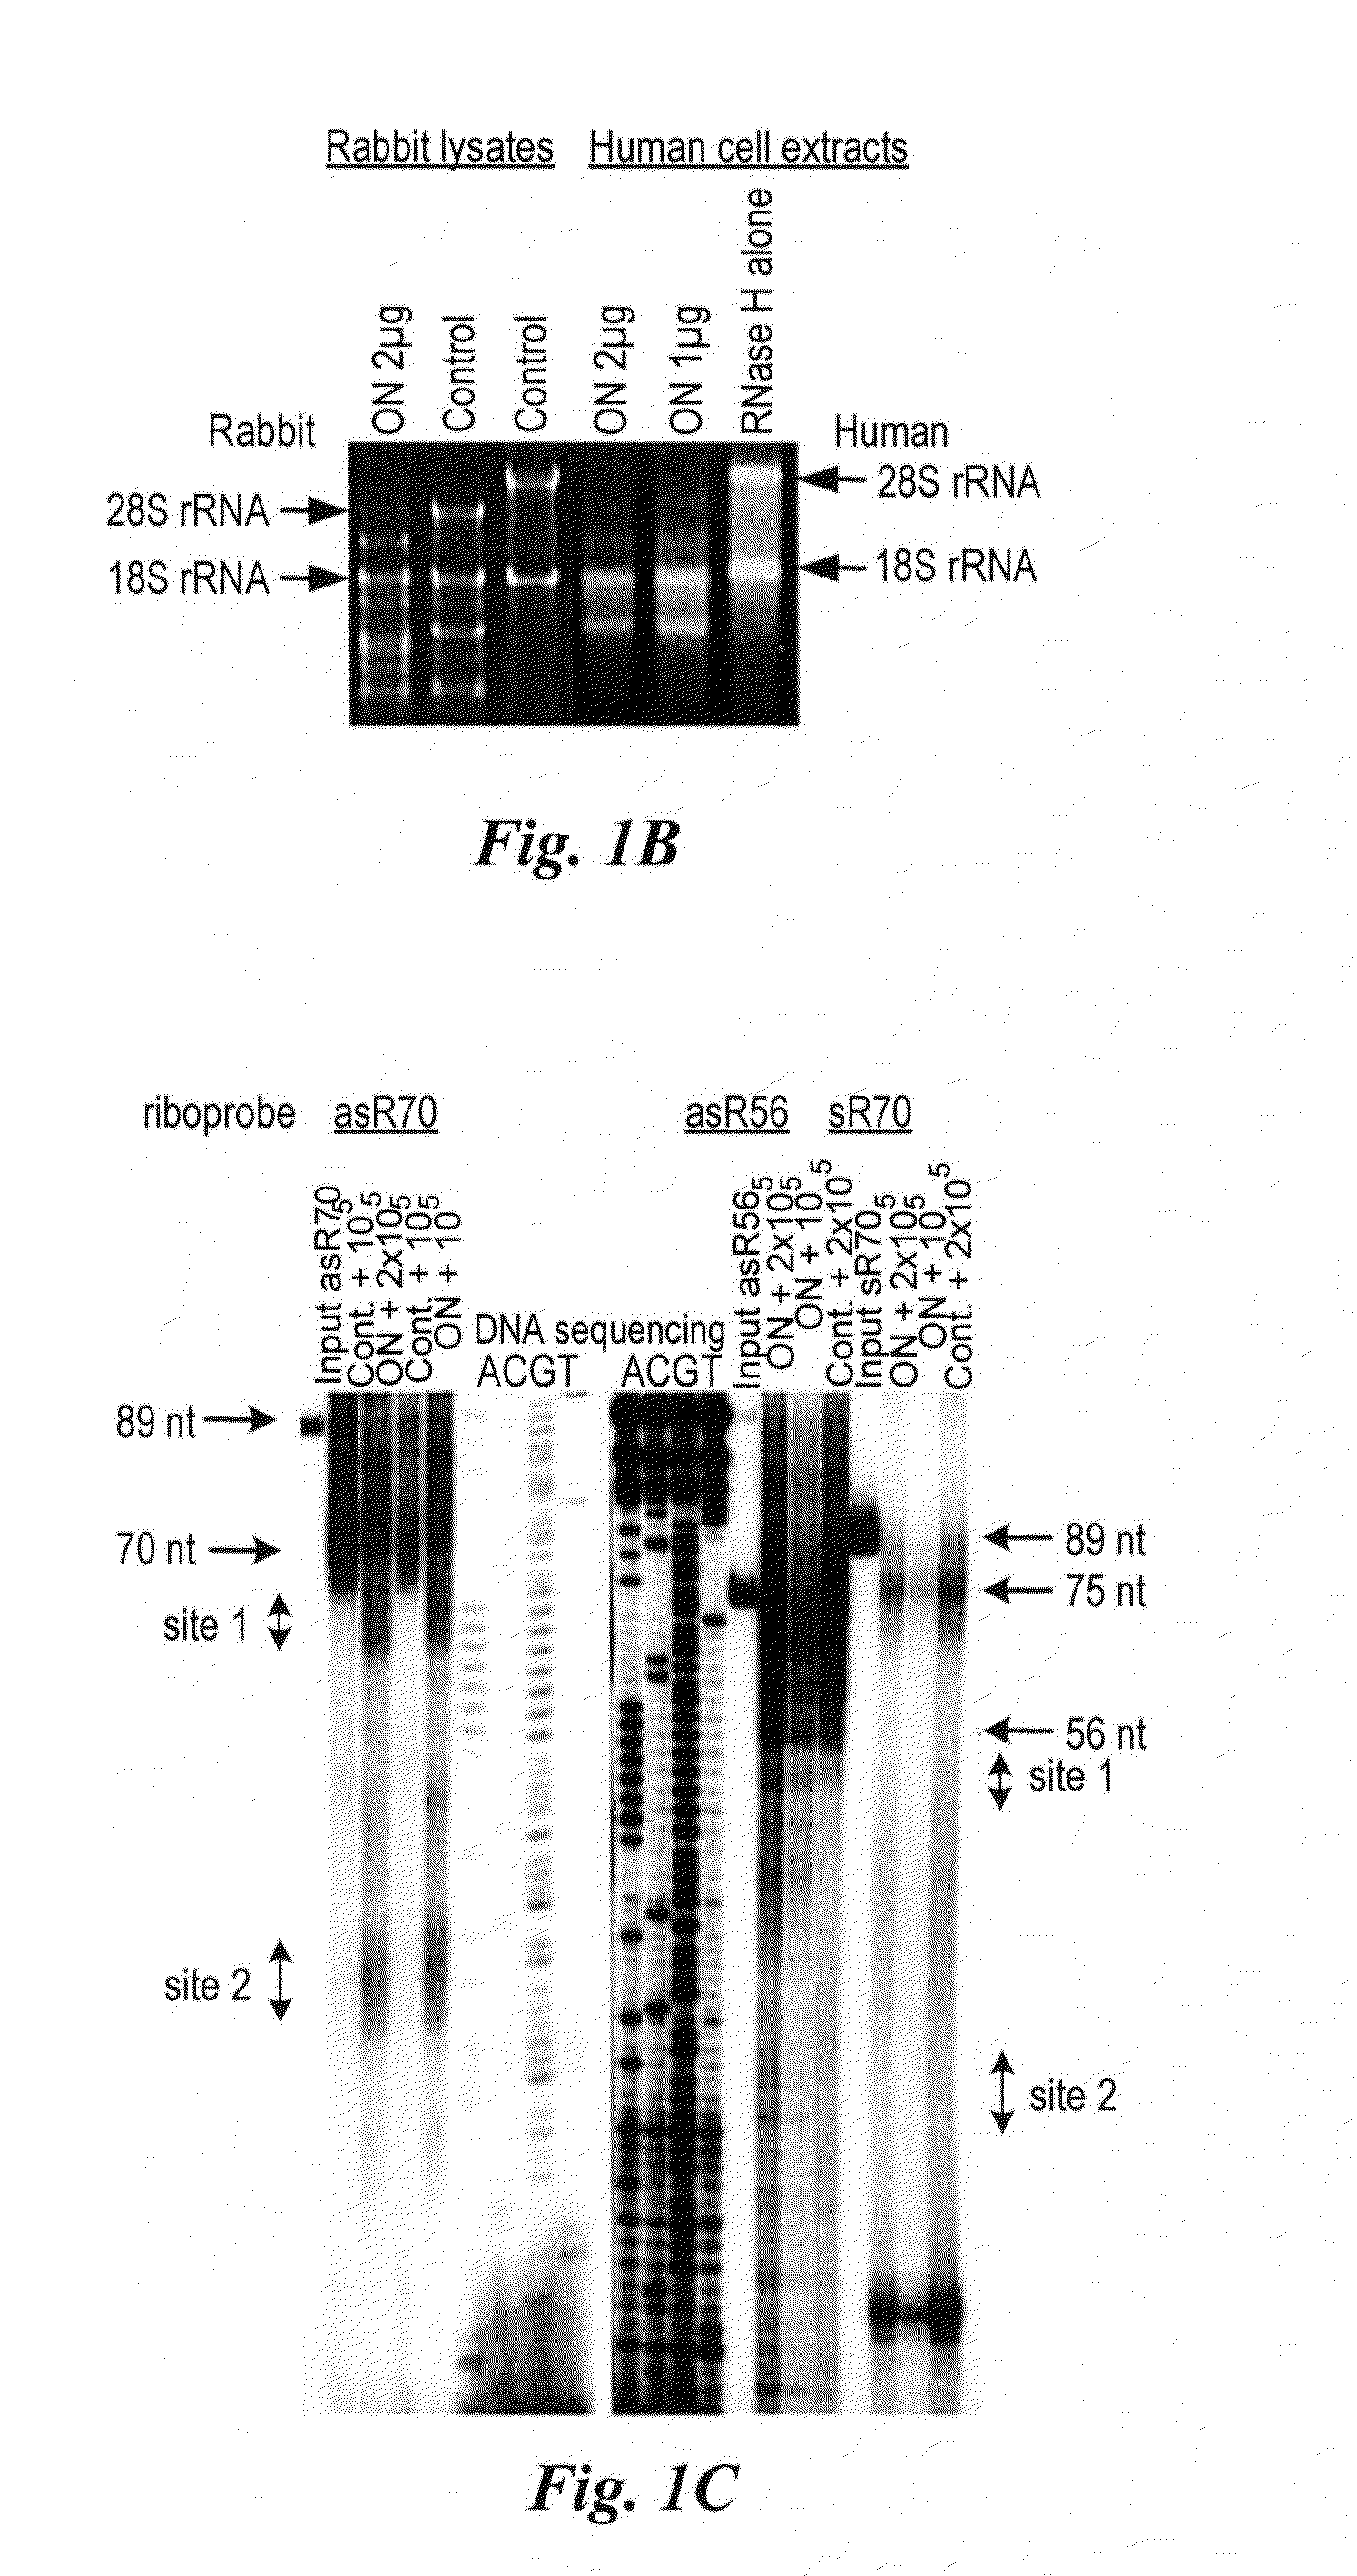 Method for preparing human neoplastically transformed cells